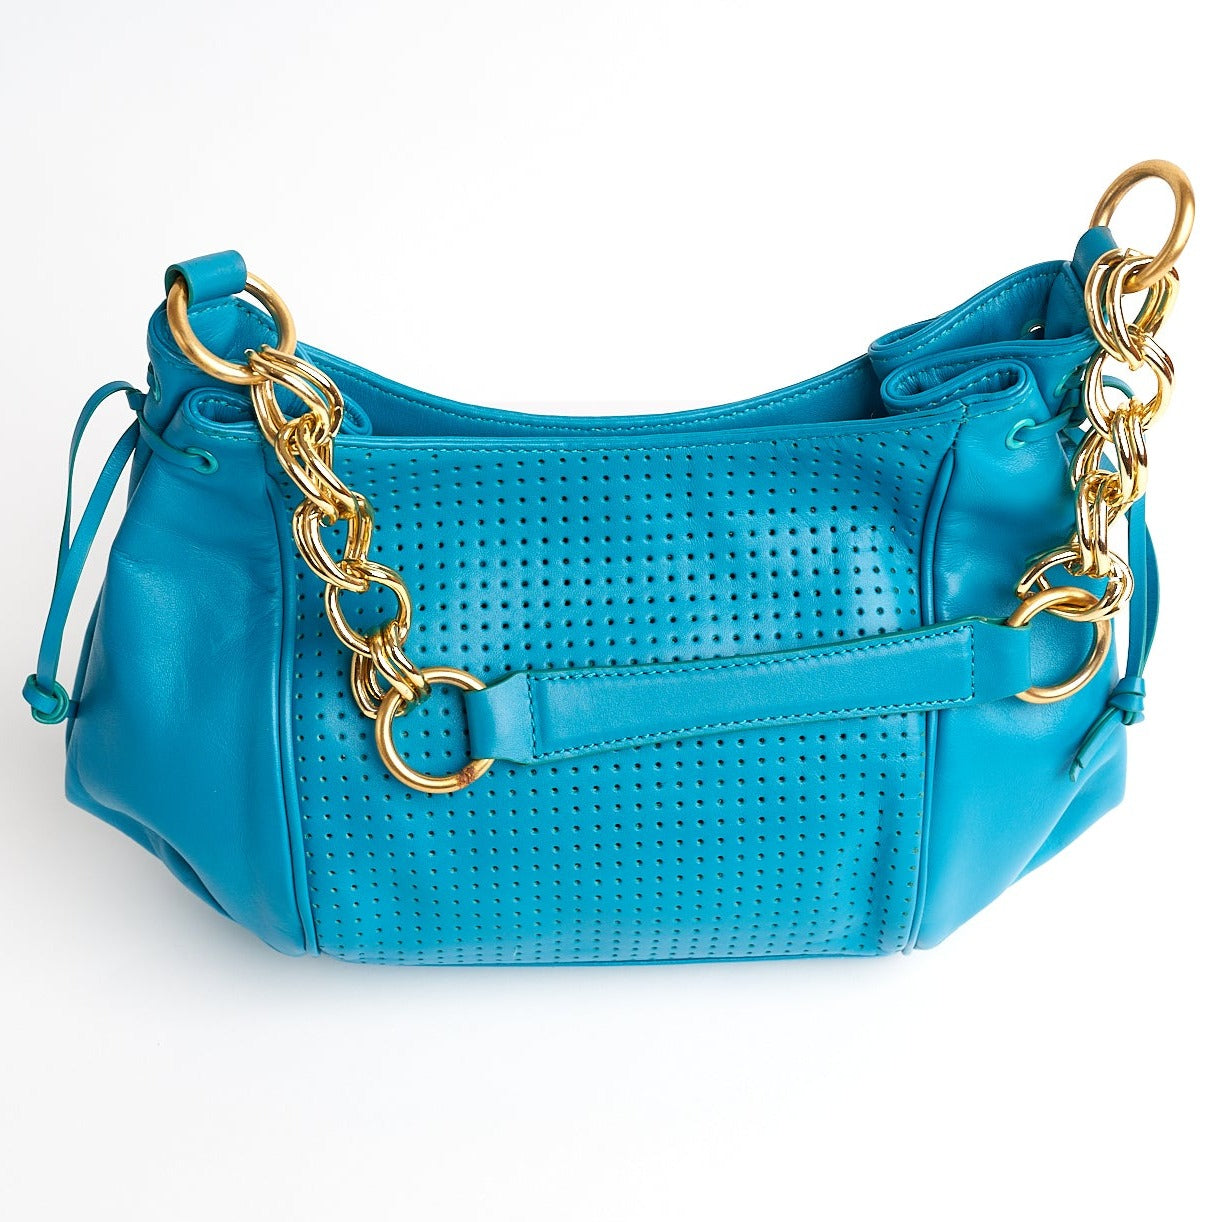 Small turquoise purse